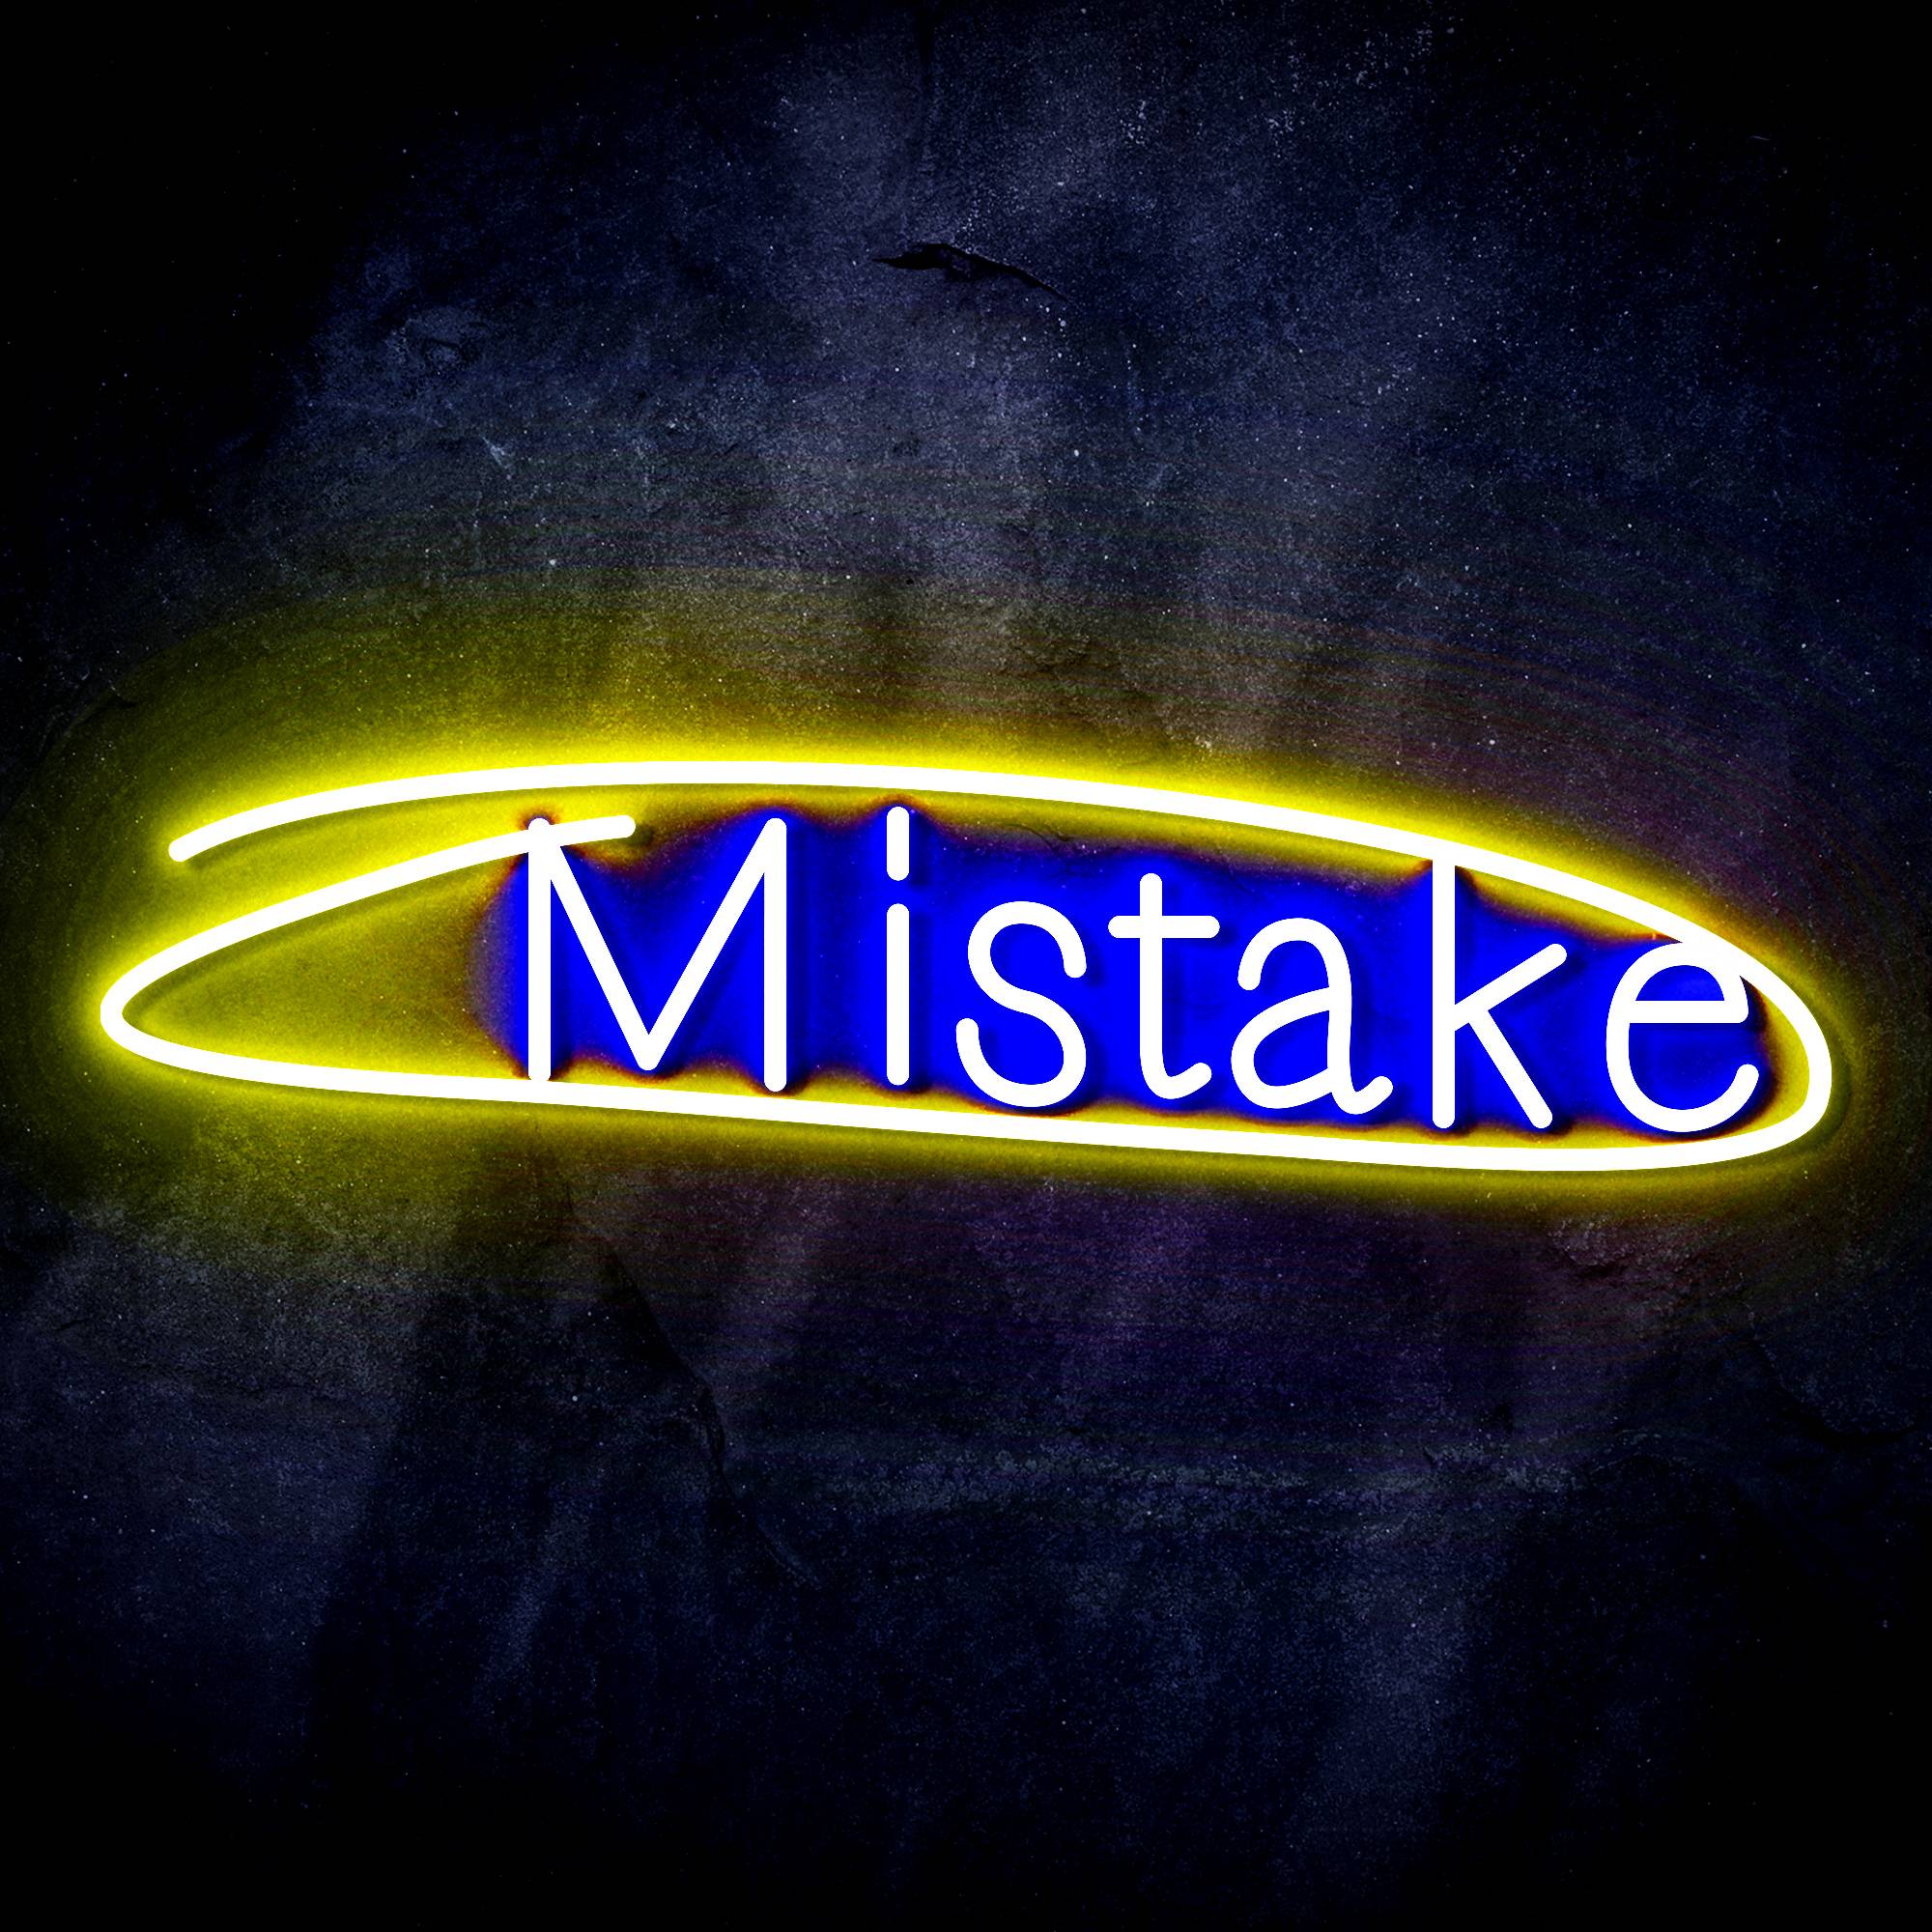 "Mistake" LED Neon Sign